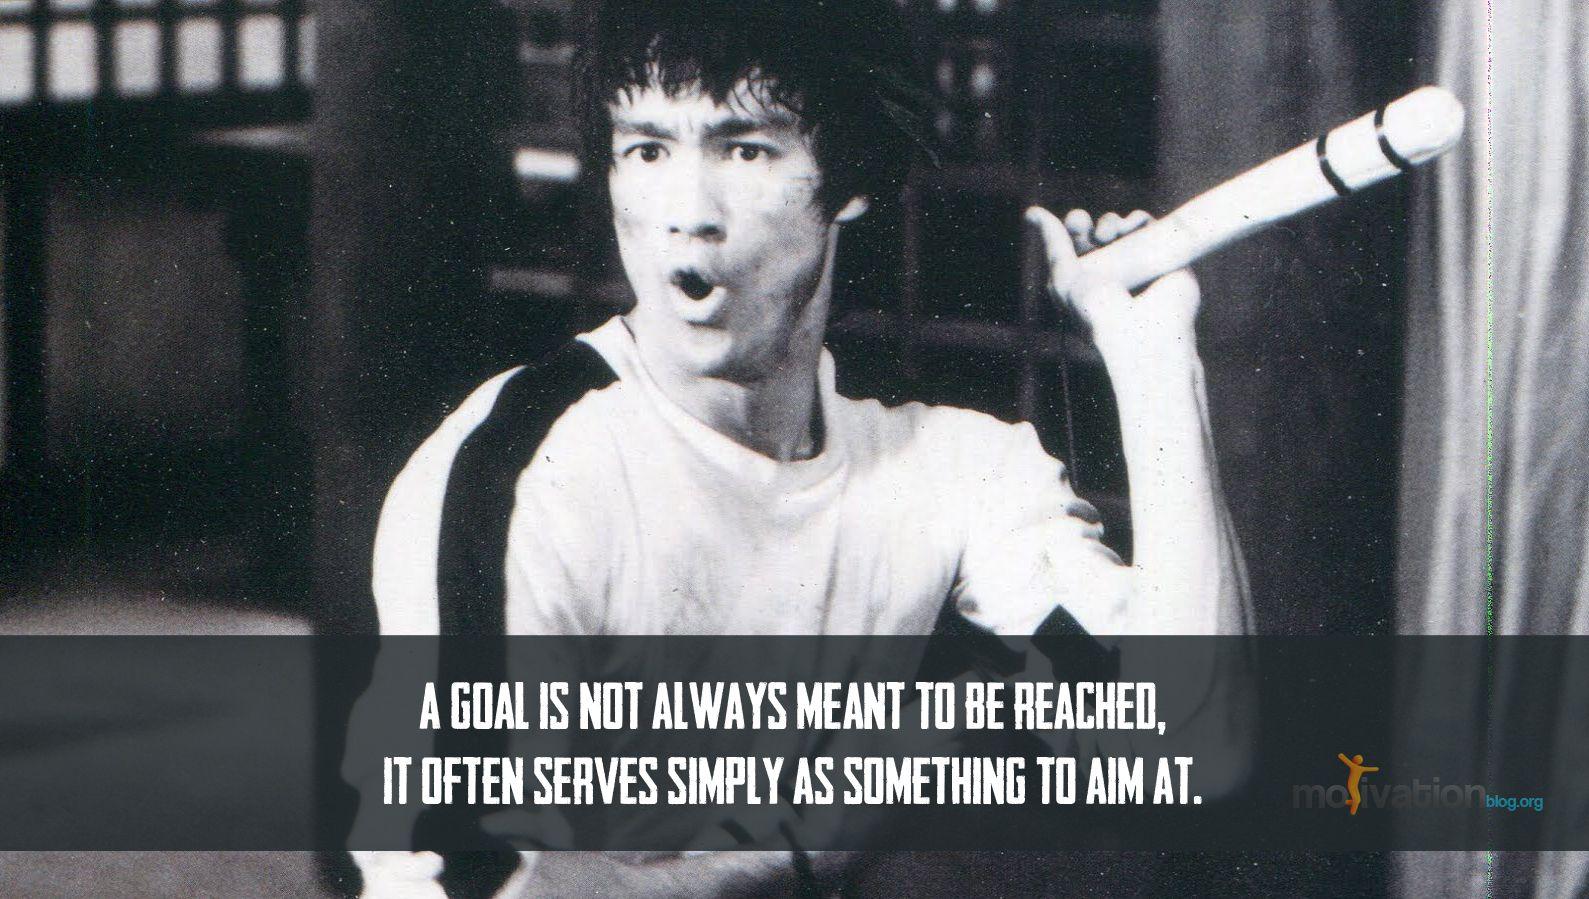 Motivational quotes and posters. Bruce Lee wallpaper